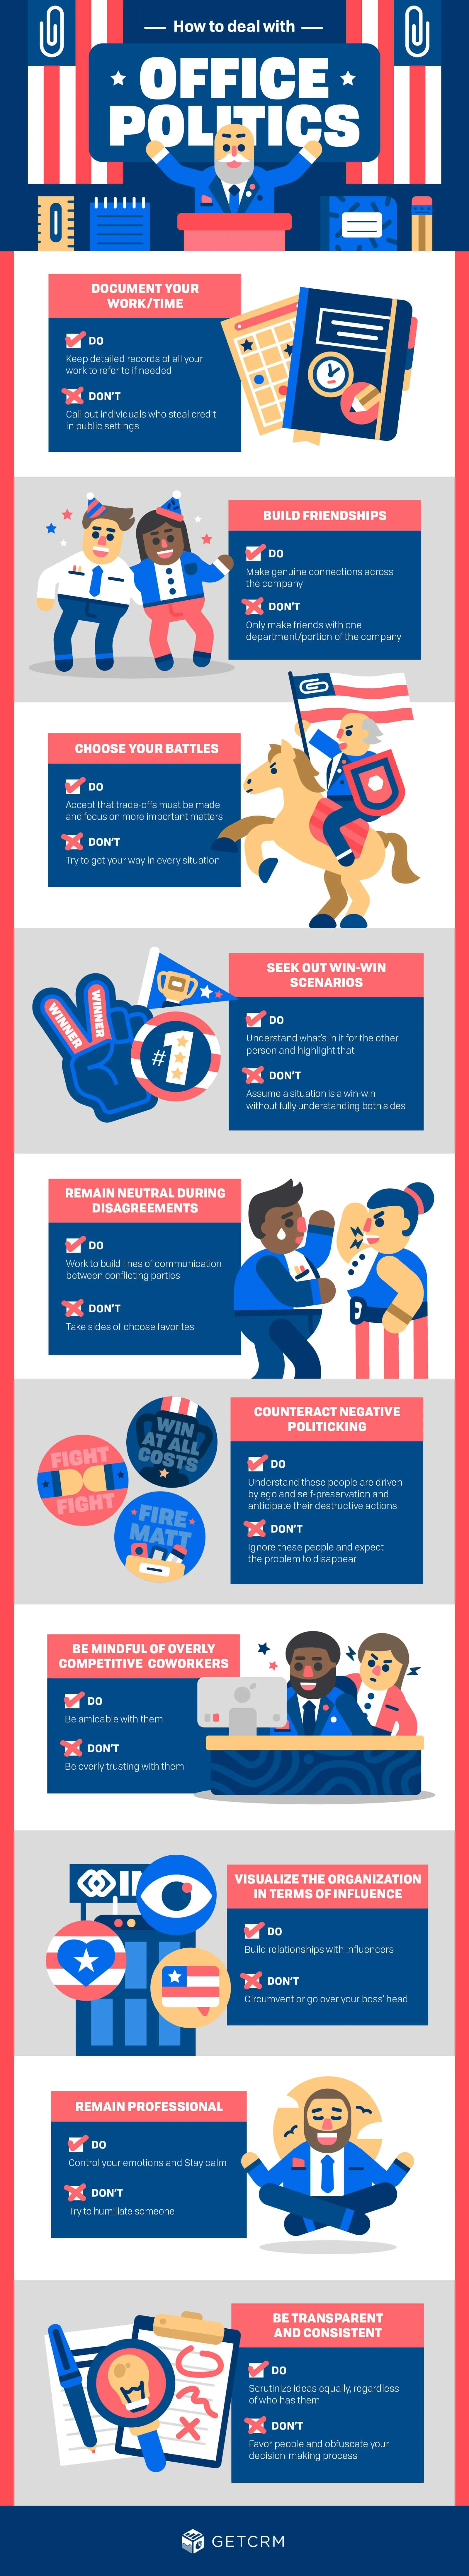 How to Deal with Office Politics - #infographic